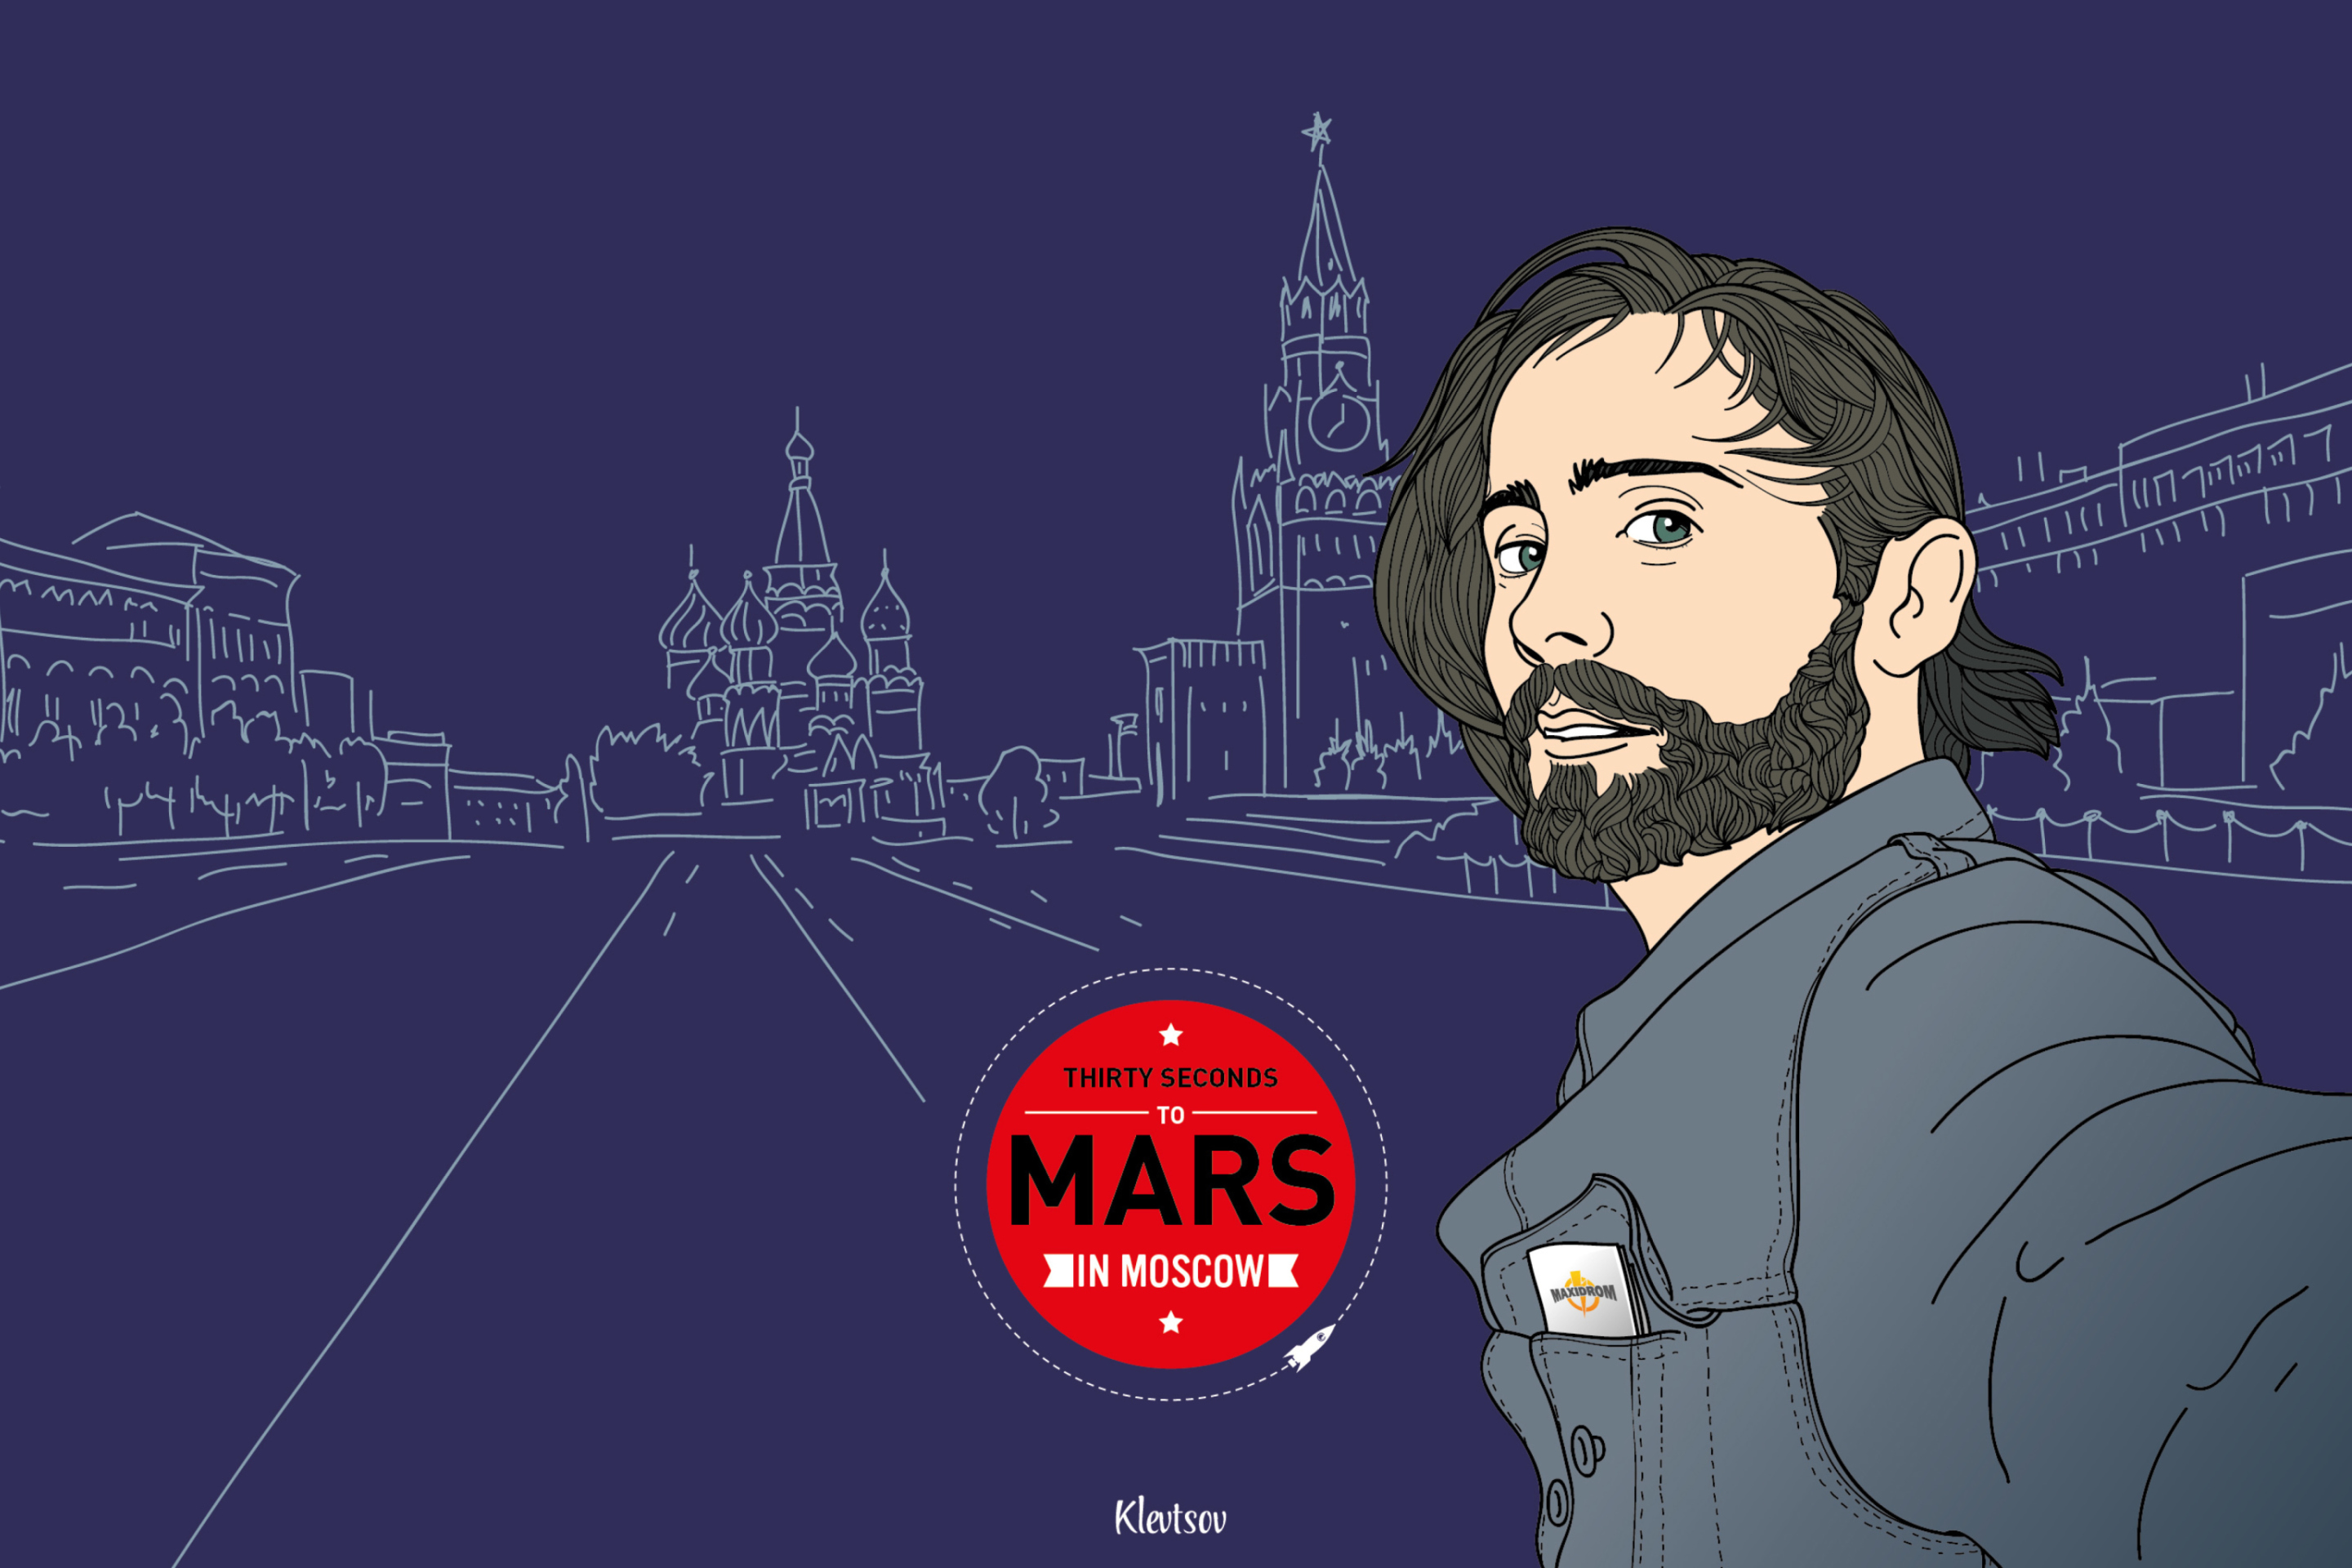 30 Seconds To Mars In Moscow screenshot #1 2880x1920